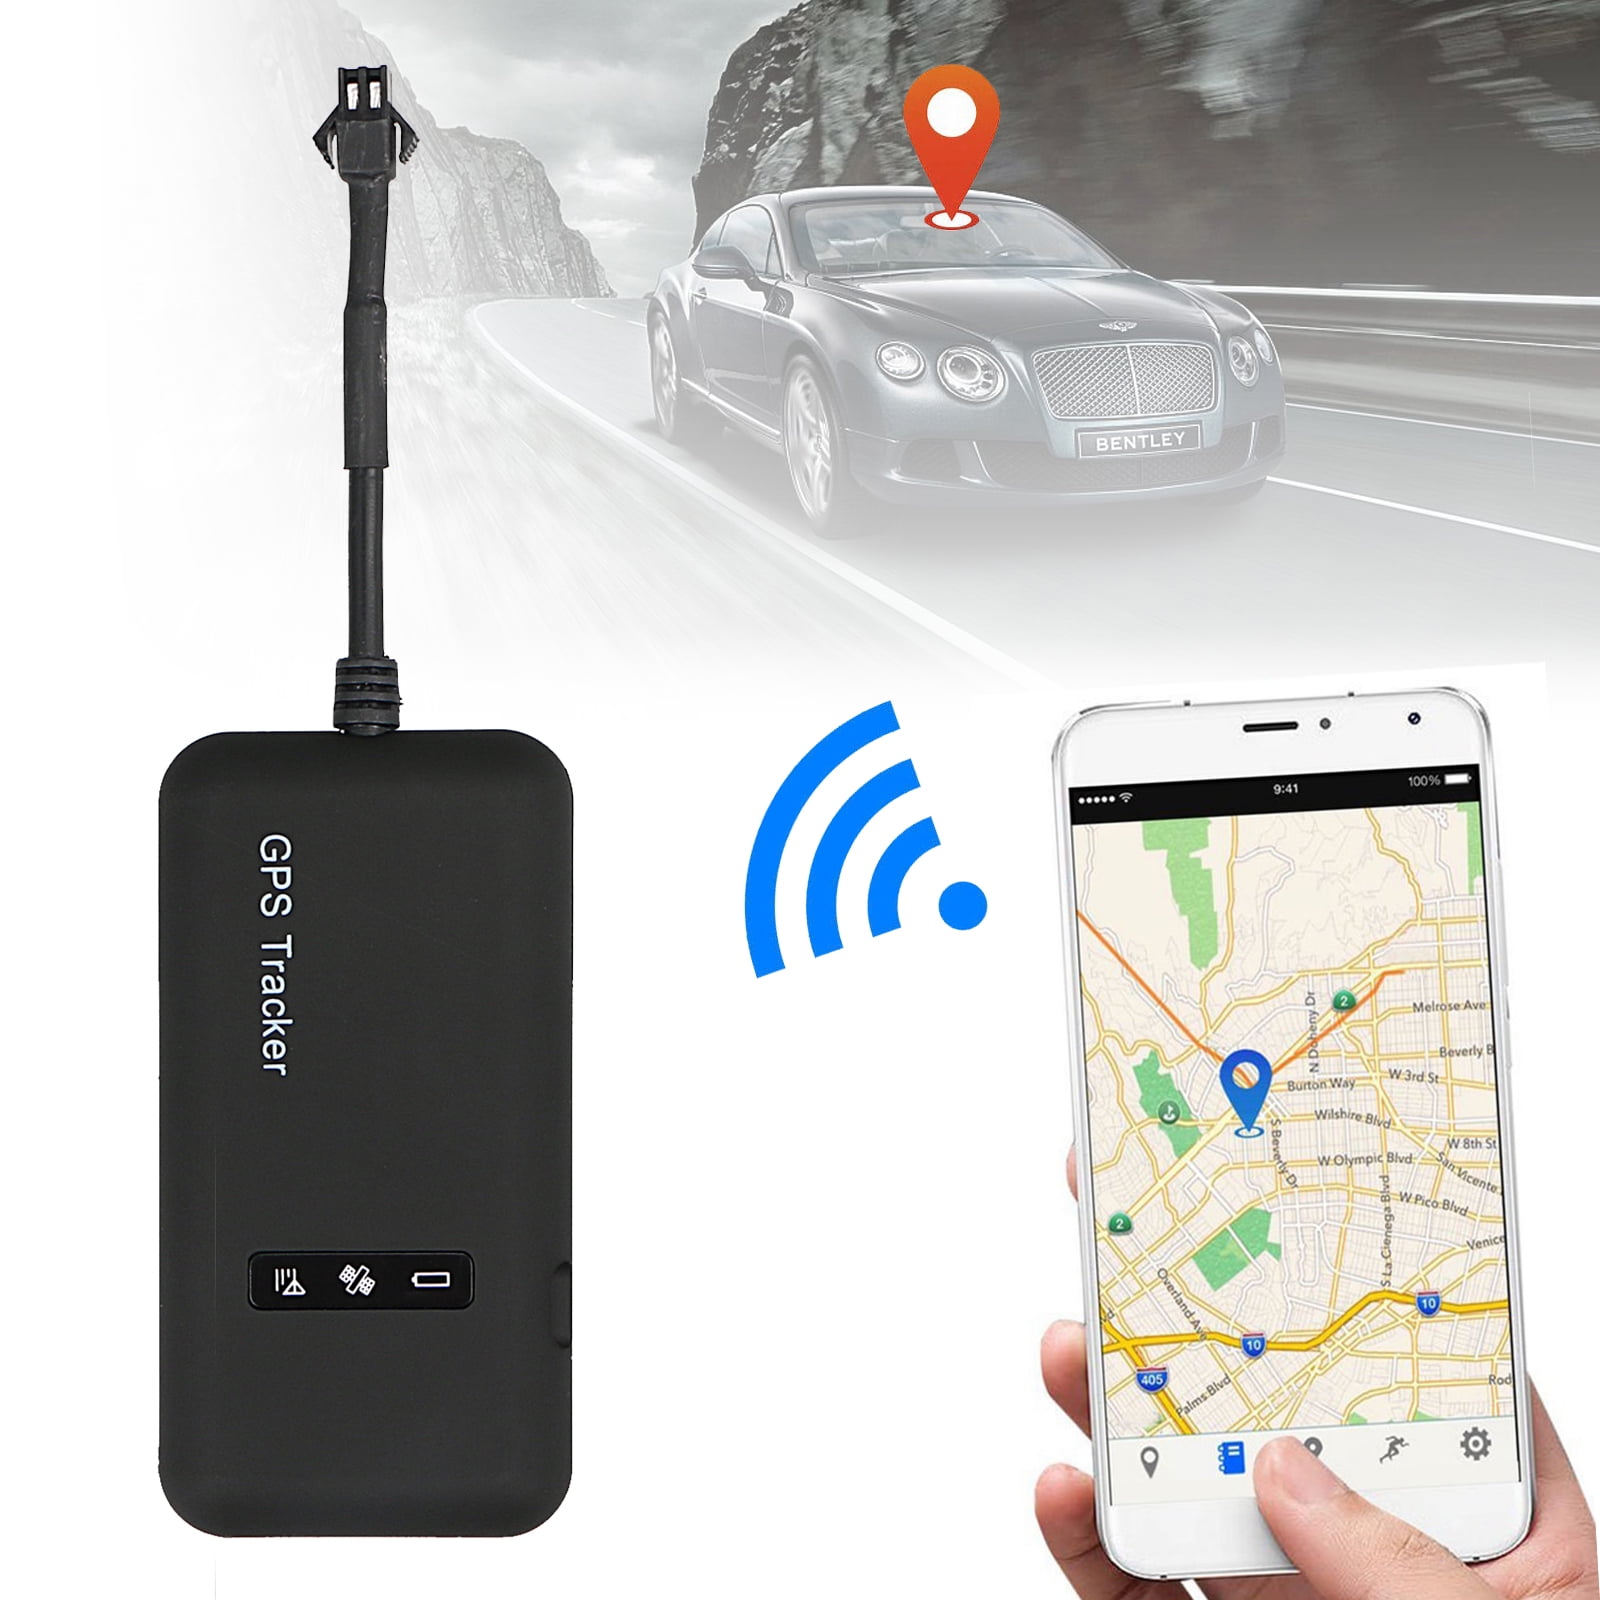 Real time GPS Tracker Motorcycle Auto Tracking Device System Anti-theft Locator